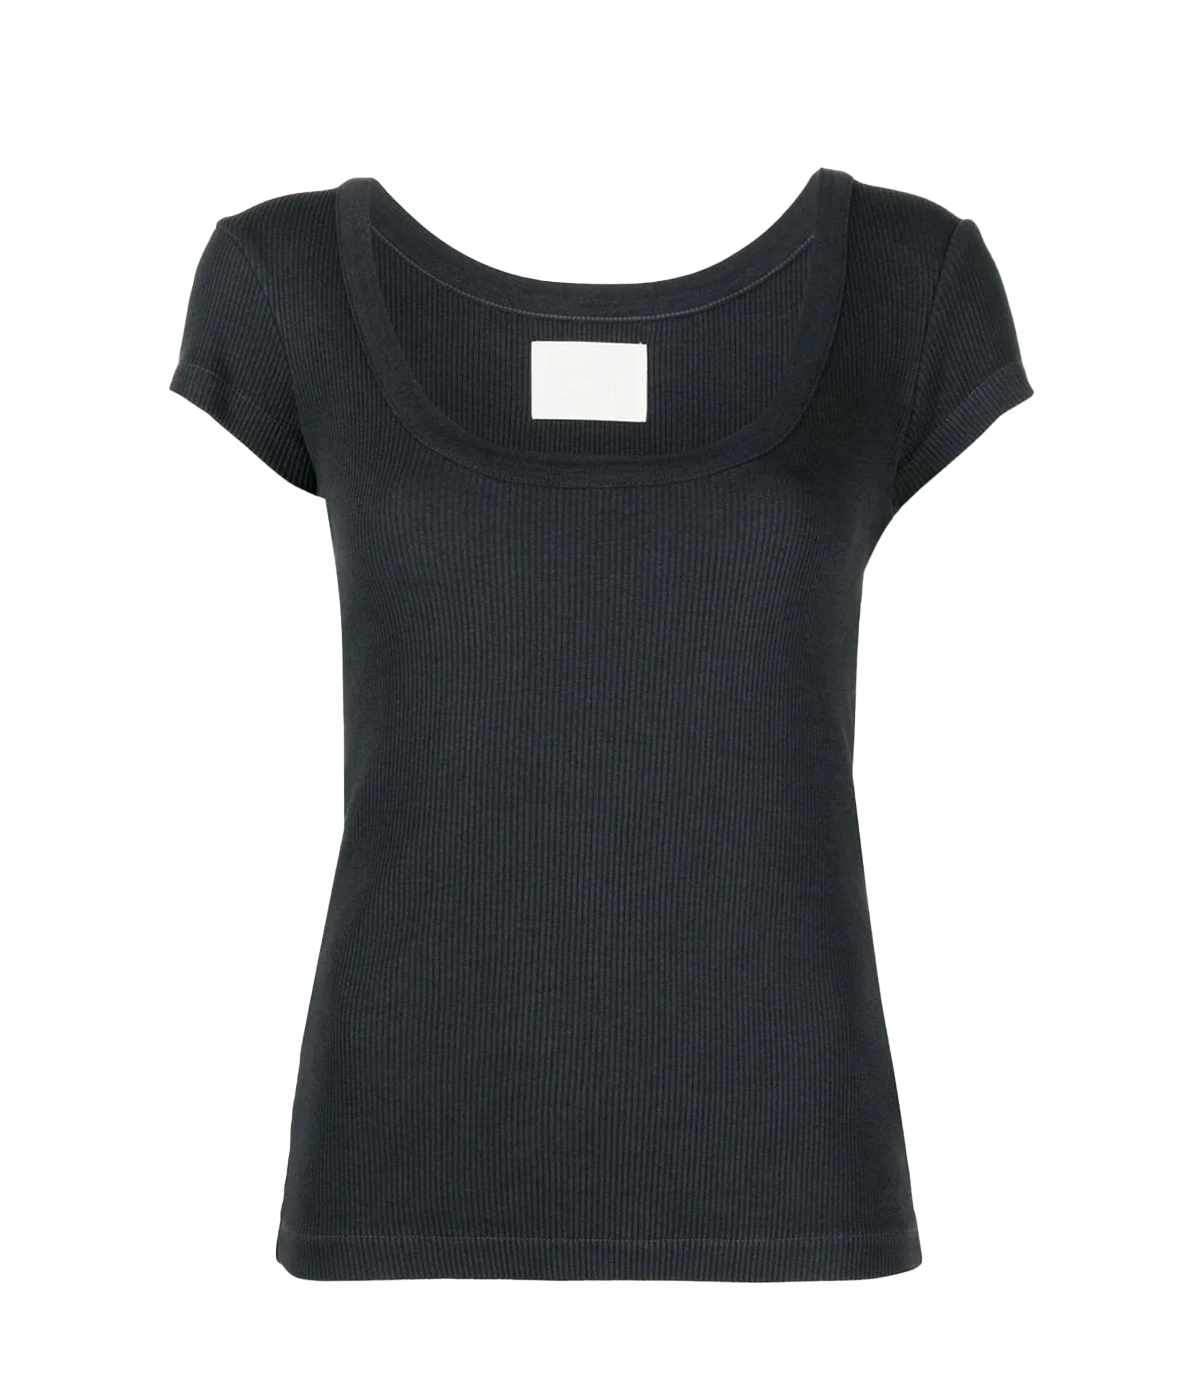 Lima Scoop Neck Top in Charcoal